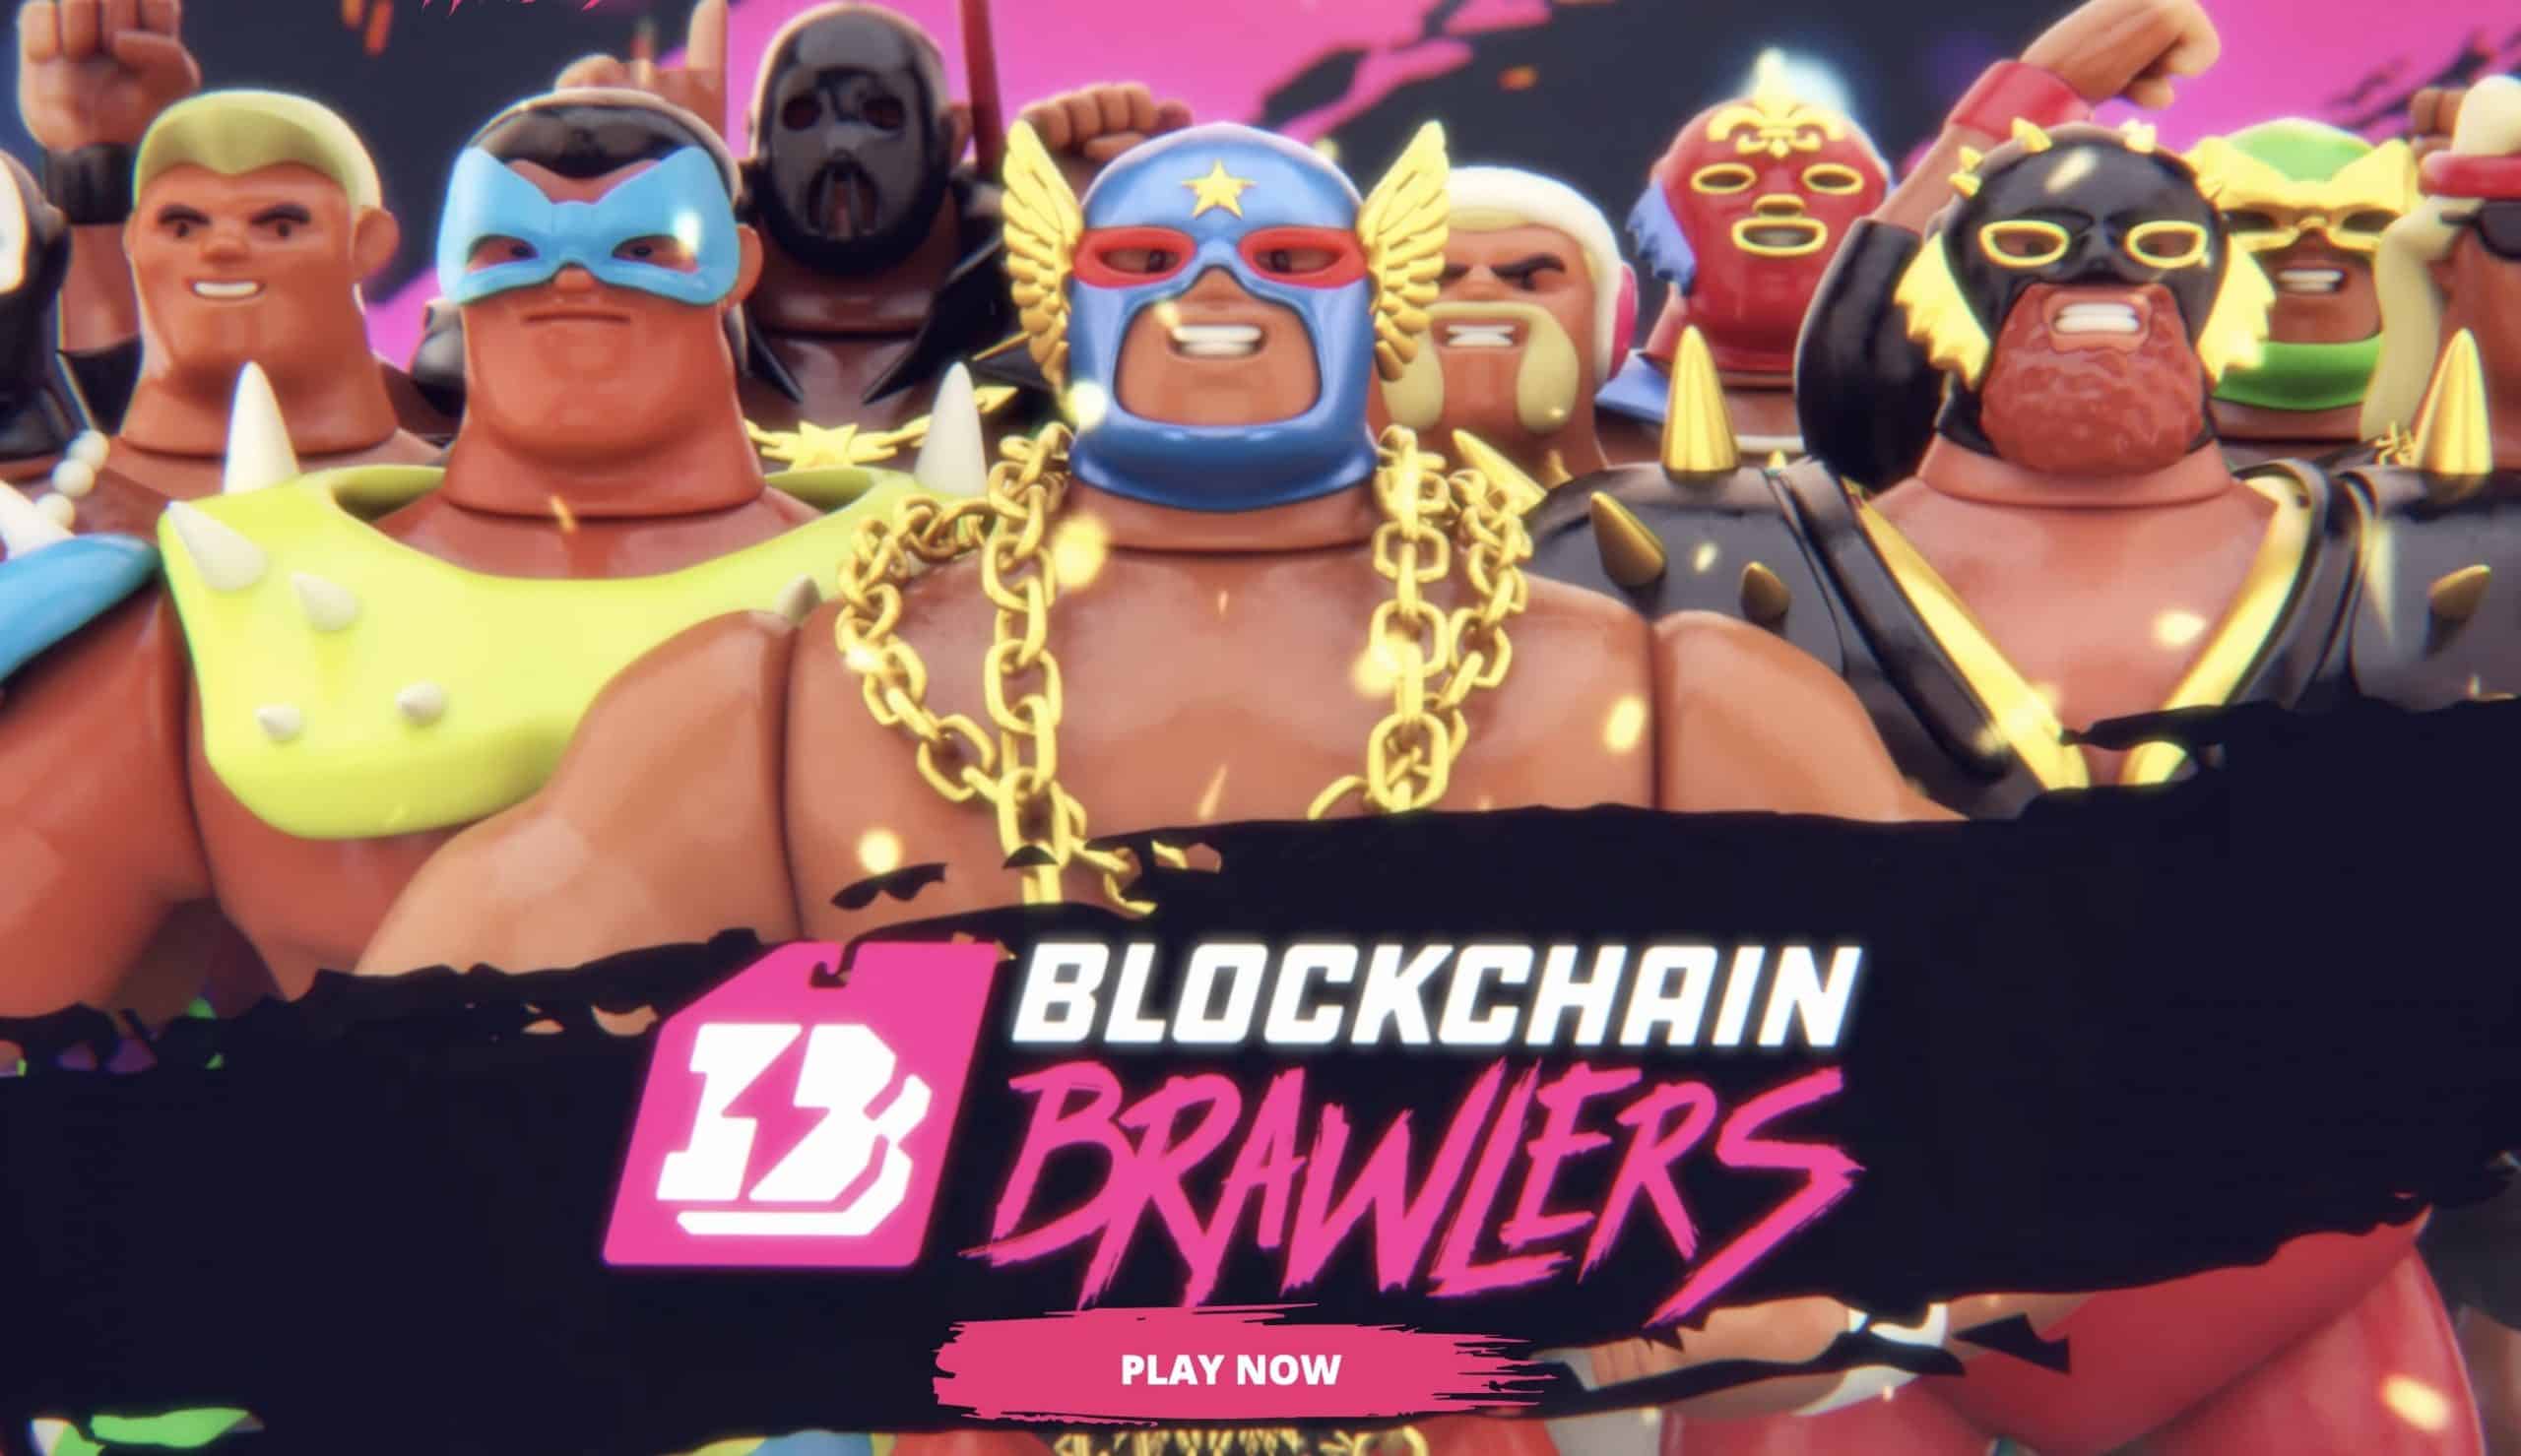 Blockchain Brawlers wax nft game wrestlers lined up